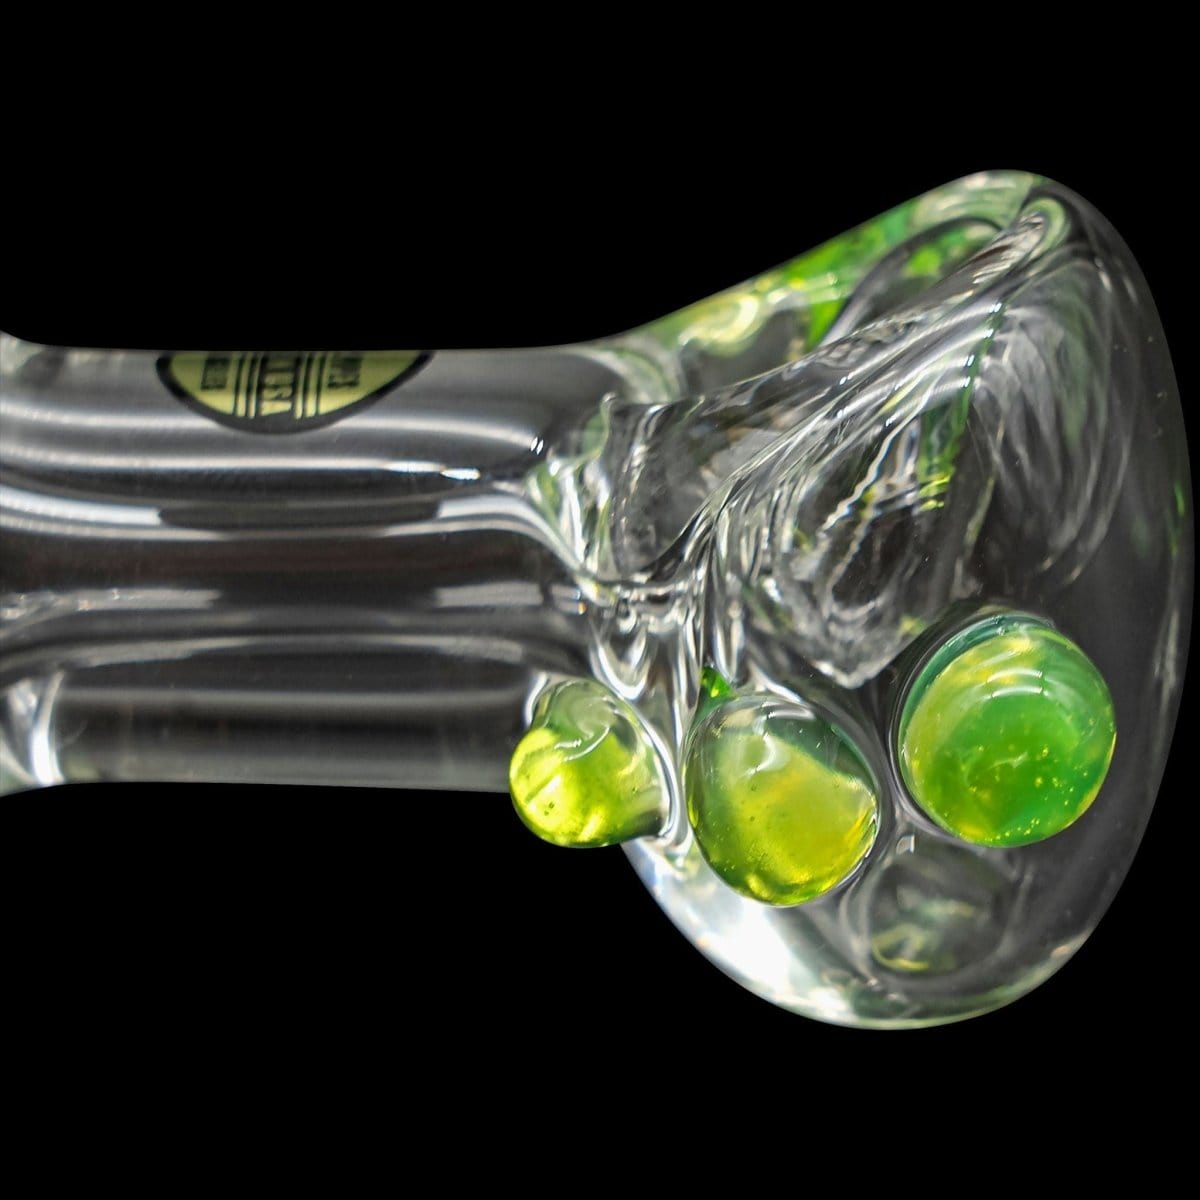 LA Pipes Hand Pipe Green Slime "Thick Ass" Glass Spoon Pipe